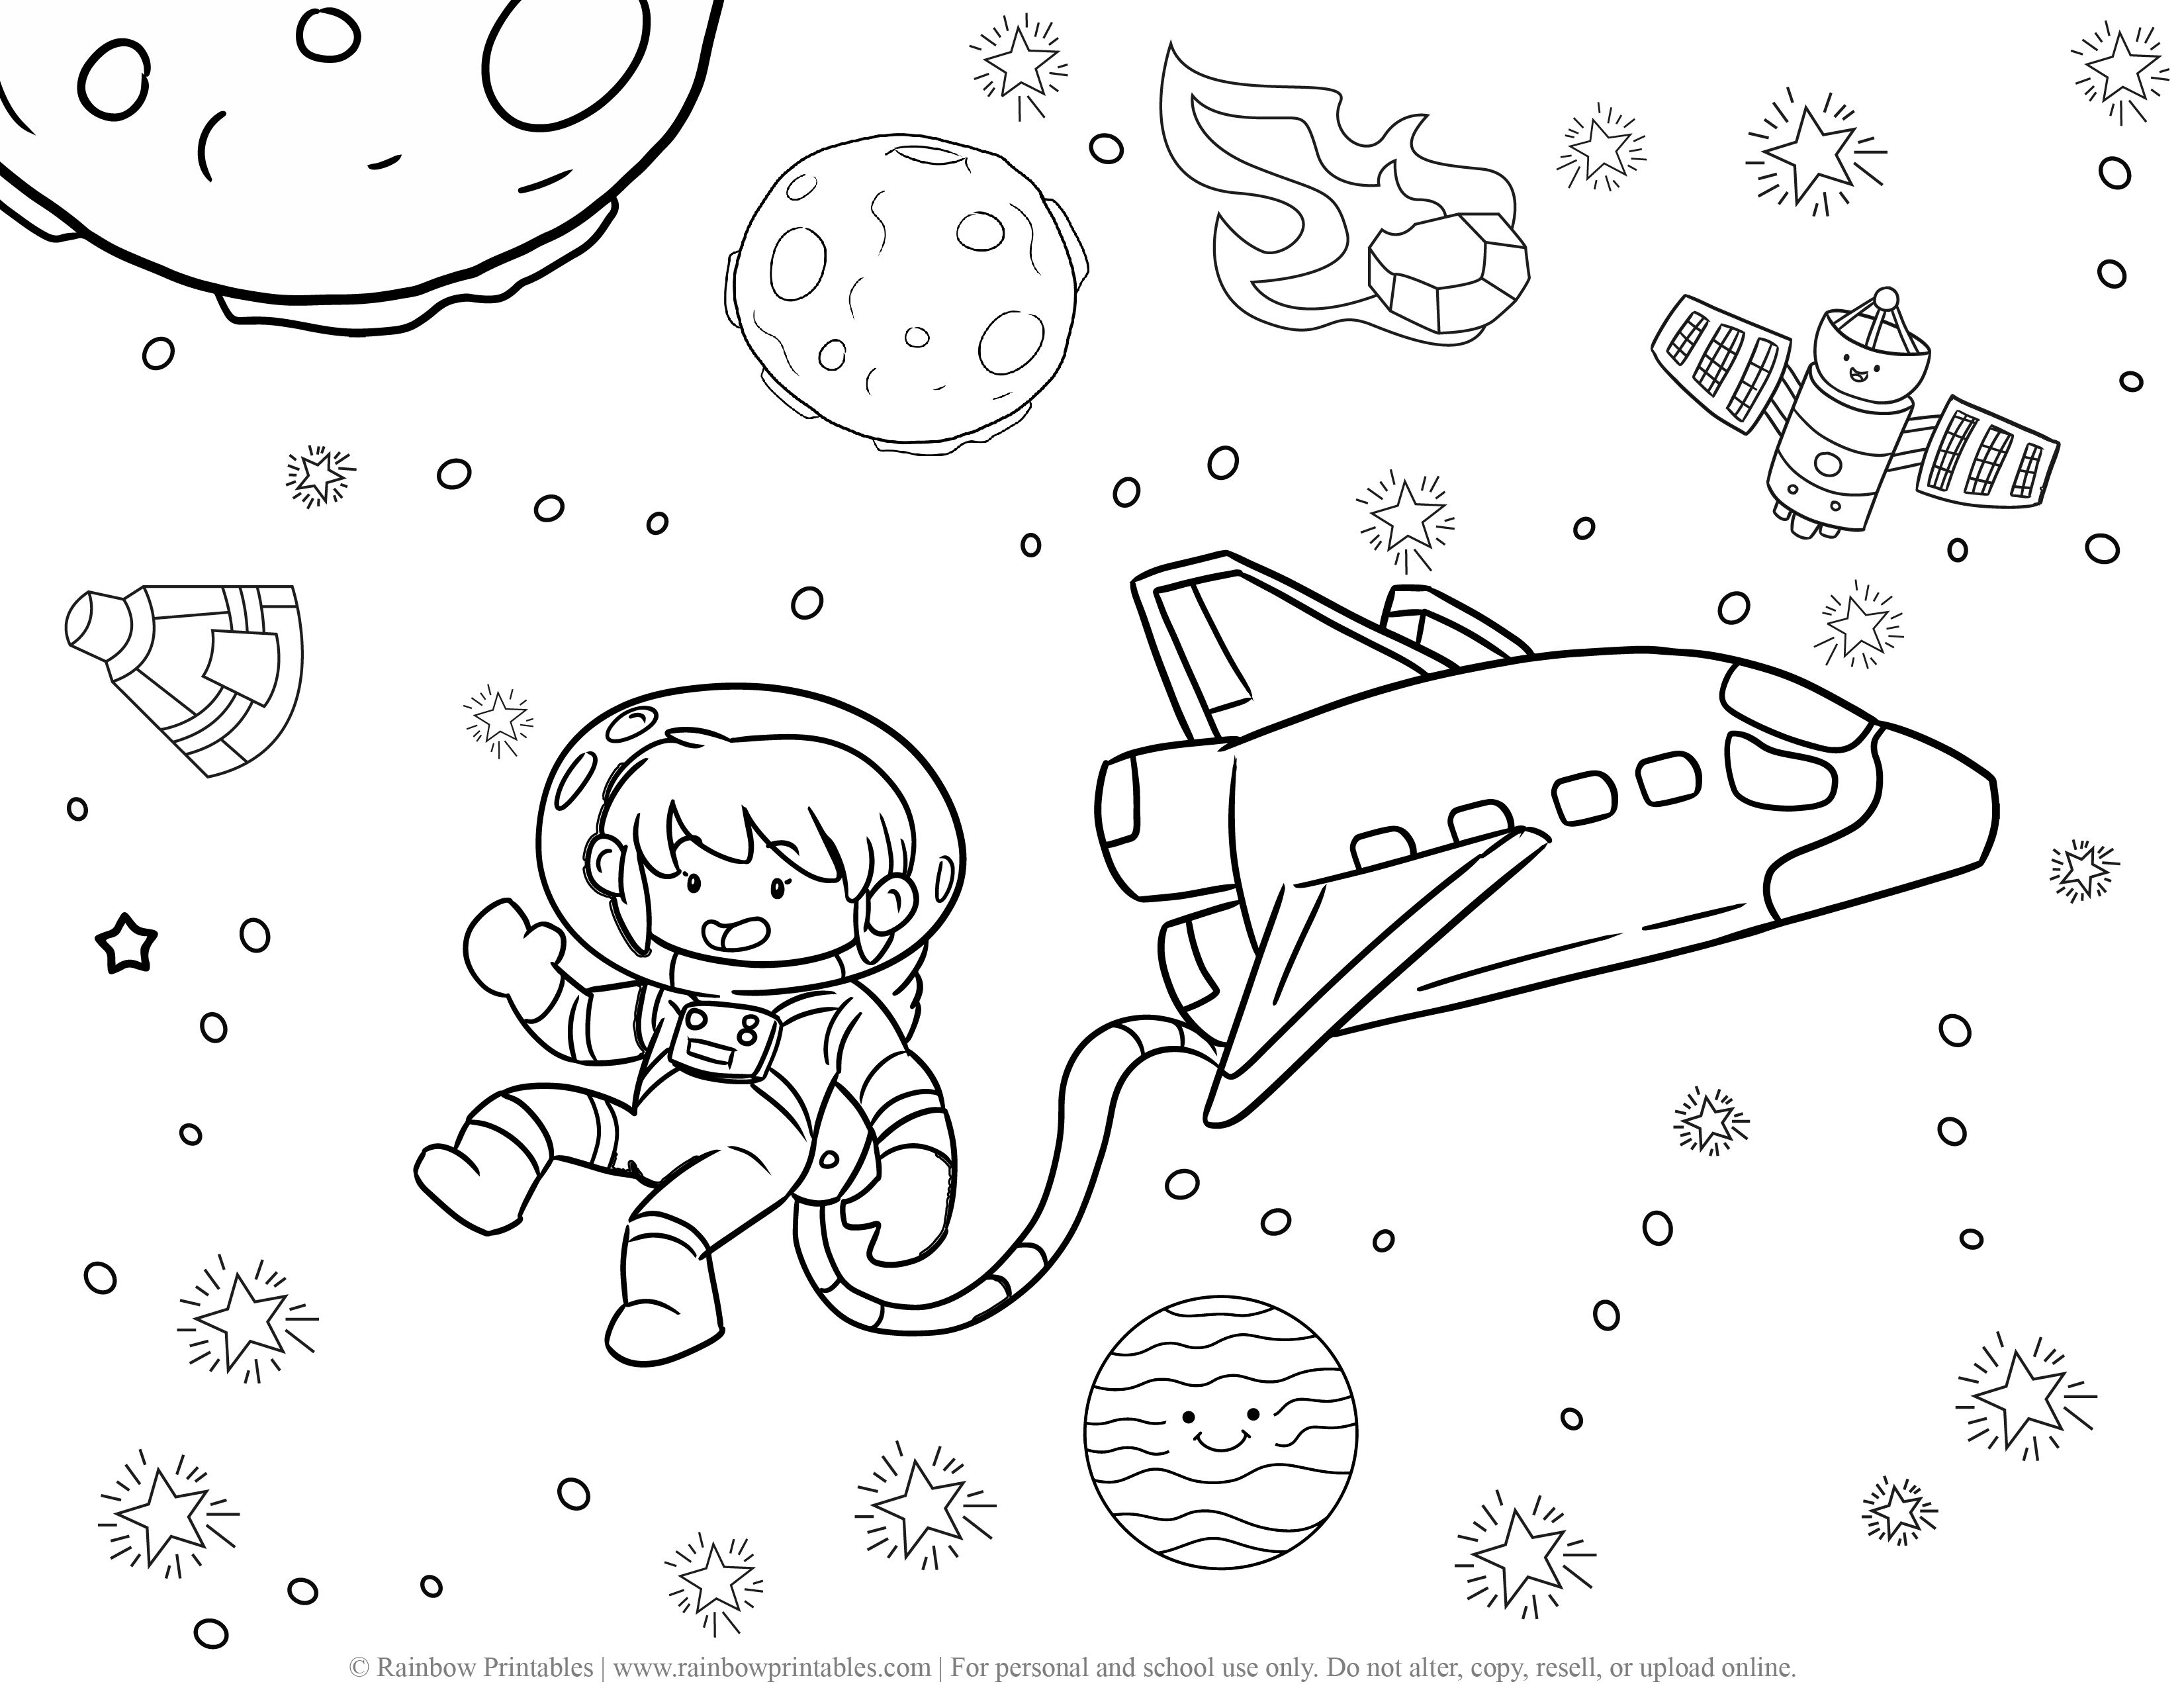 11 Rocket Ship, Cute Aliens & UFO in Outer Space Coloring Pages For Kids -  Rainbow Printables